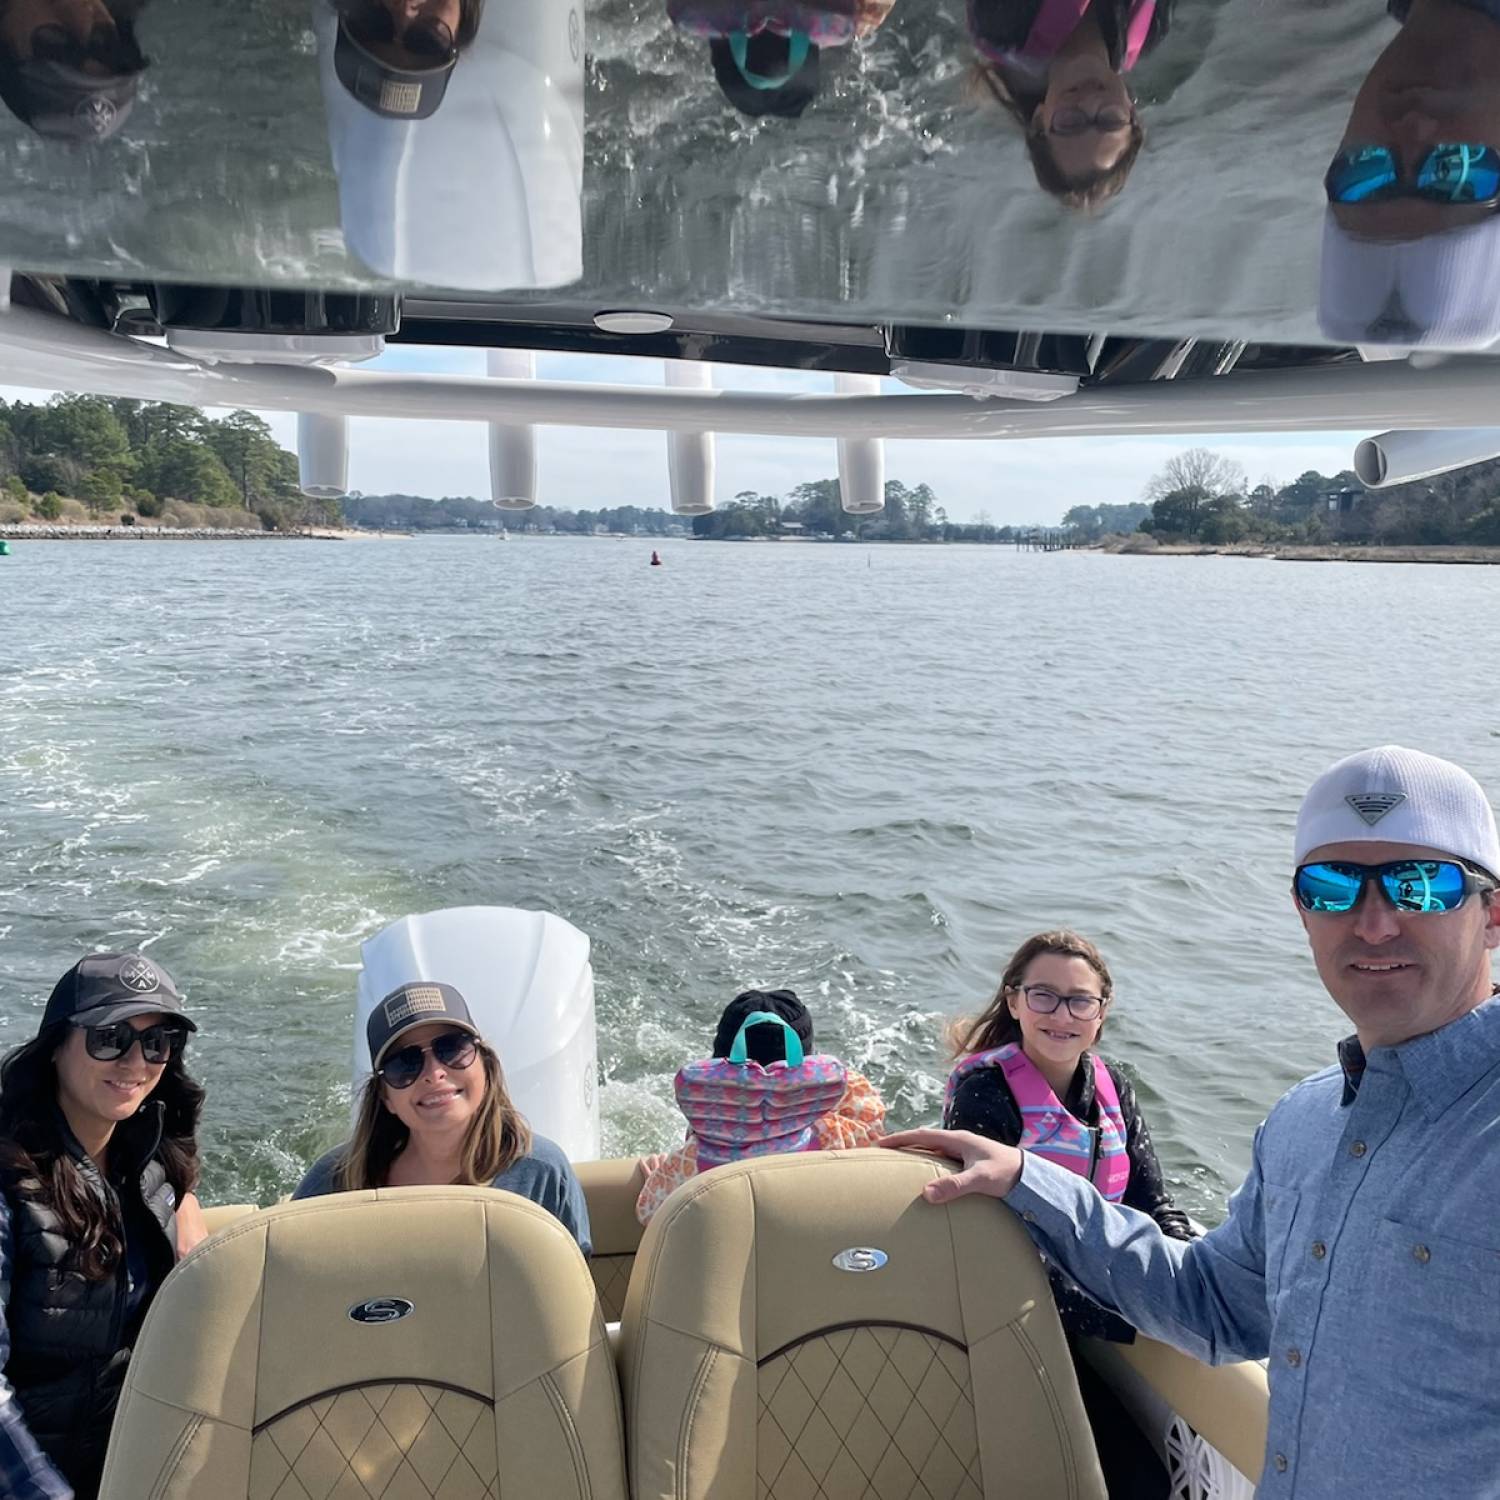 Title: Making the most of a warm winter day - On board their Sportsman Heritage 231 Center Console - Location: Virginia Beach VA. Participating in the Photo Contest #SportsmanMarch